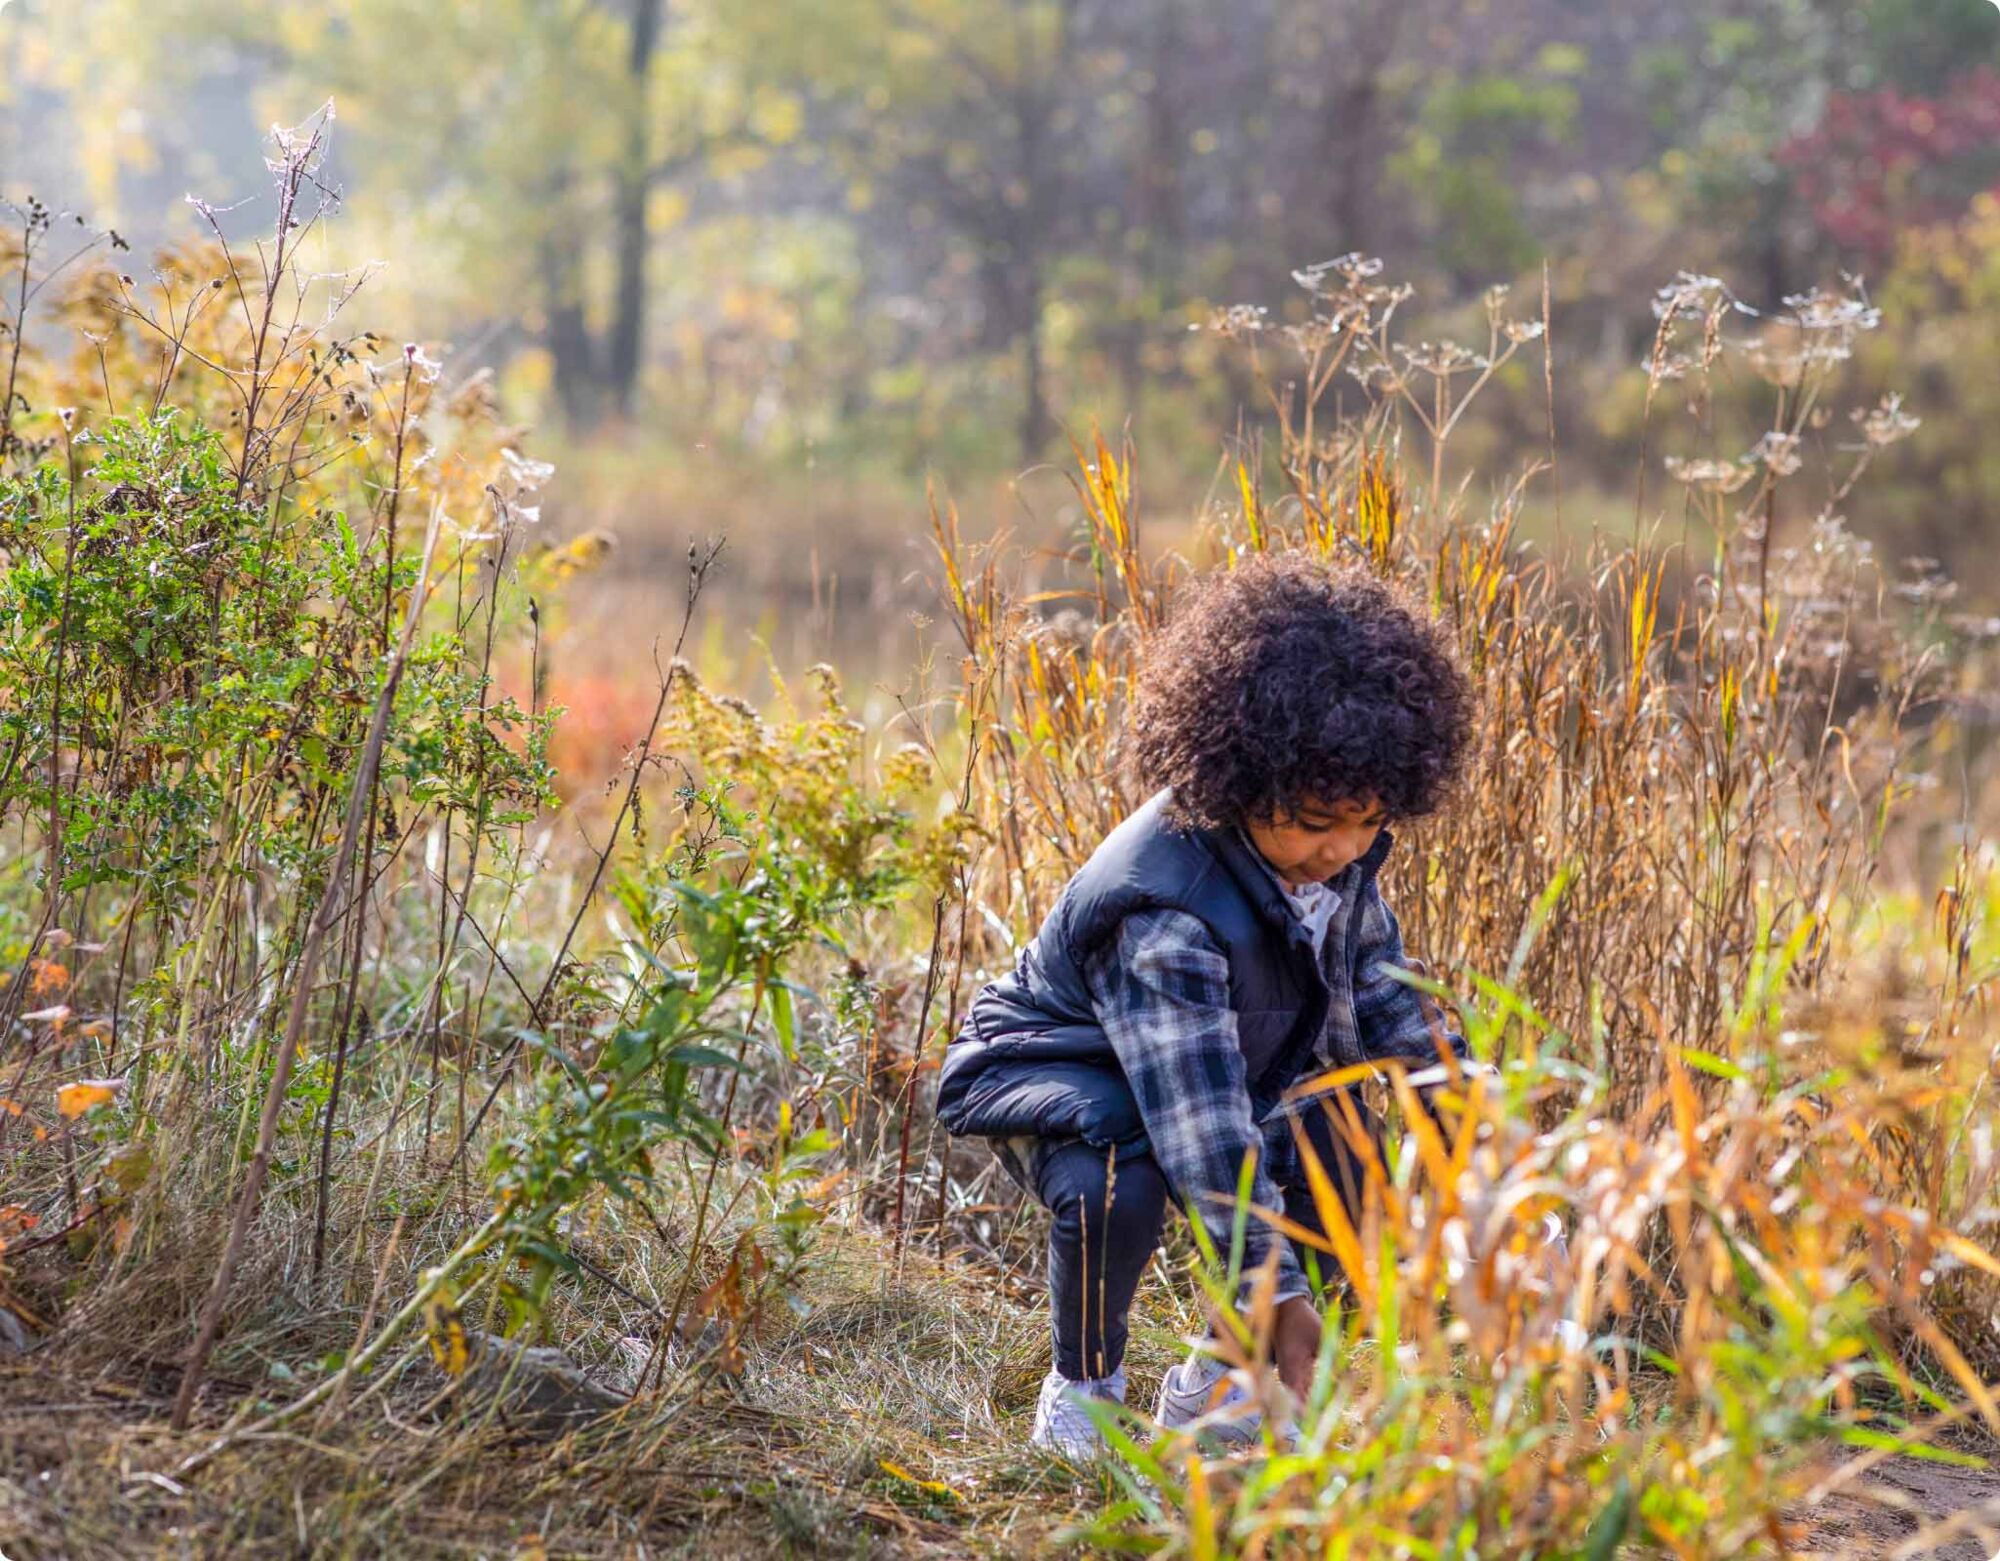 A child bending over and playing in long grass near a trail.